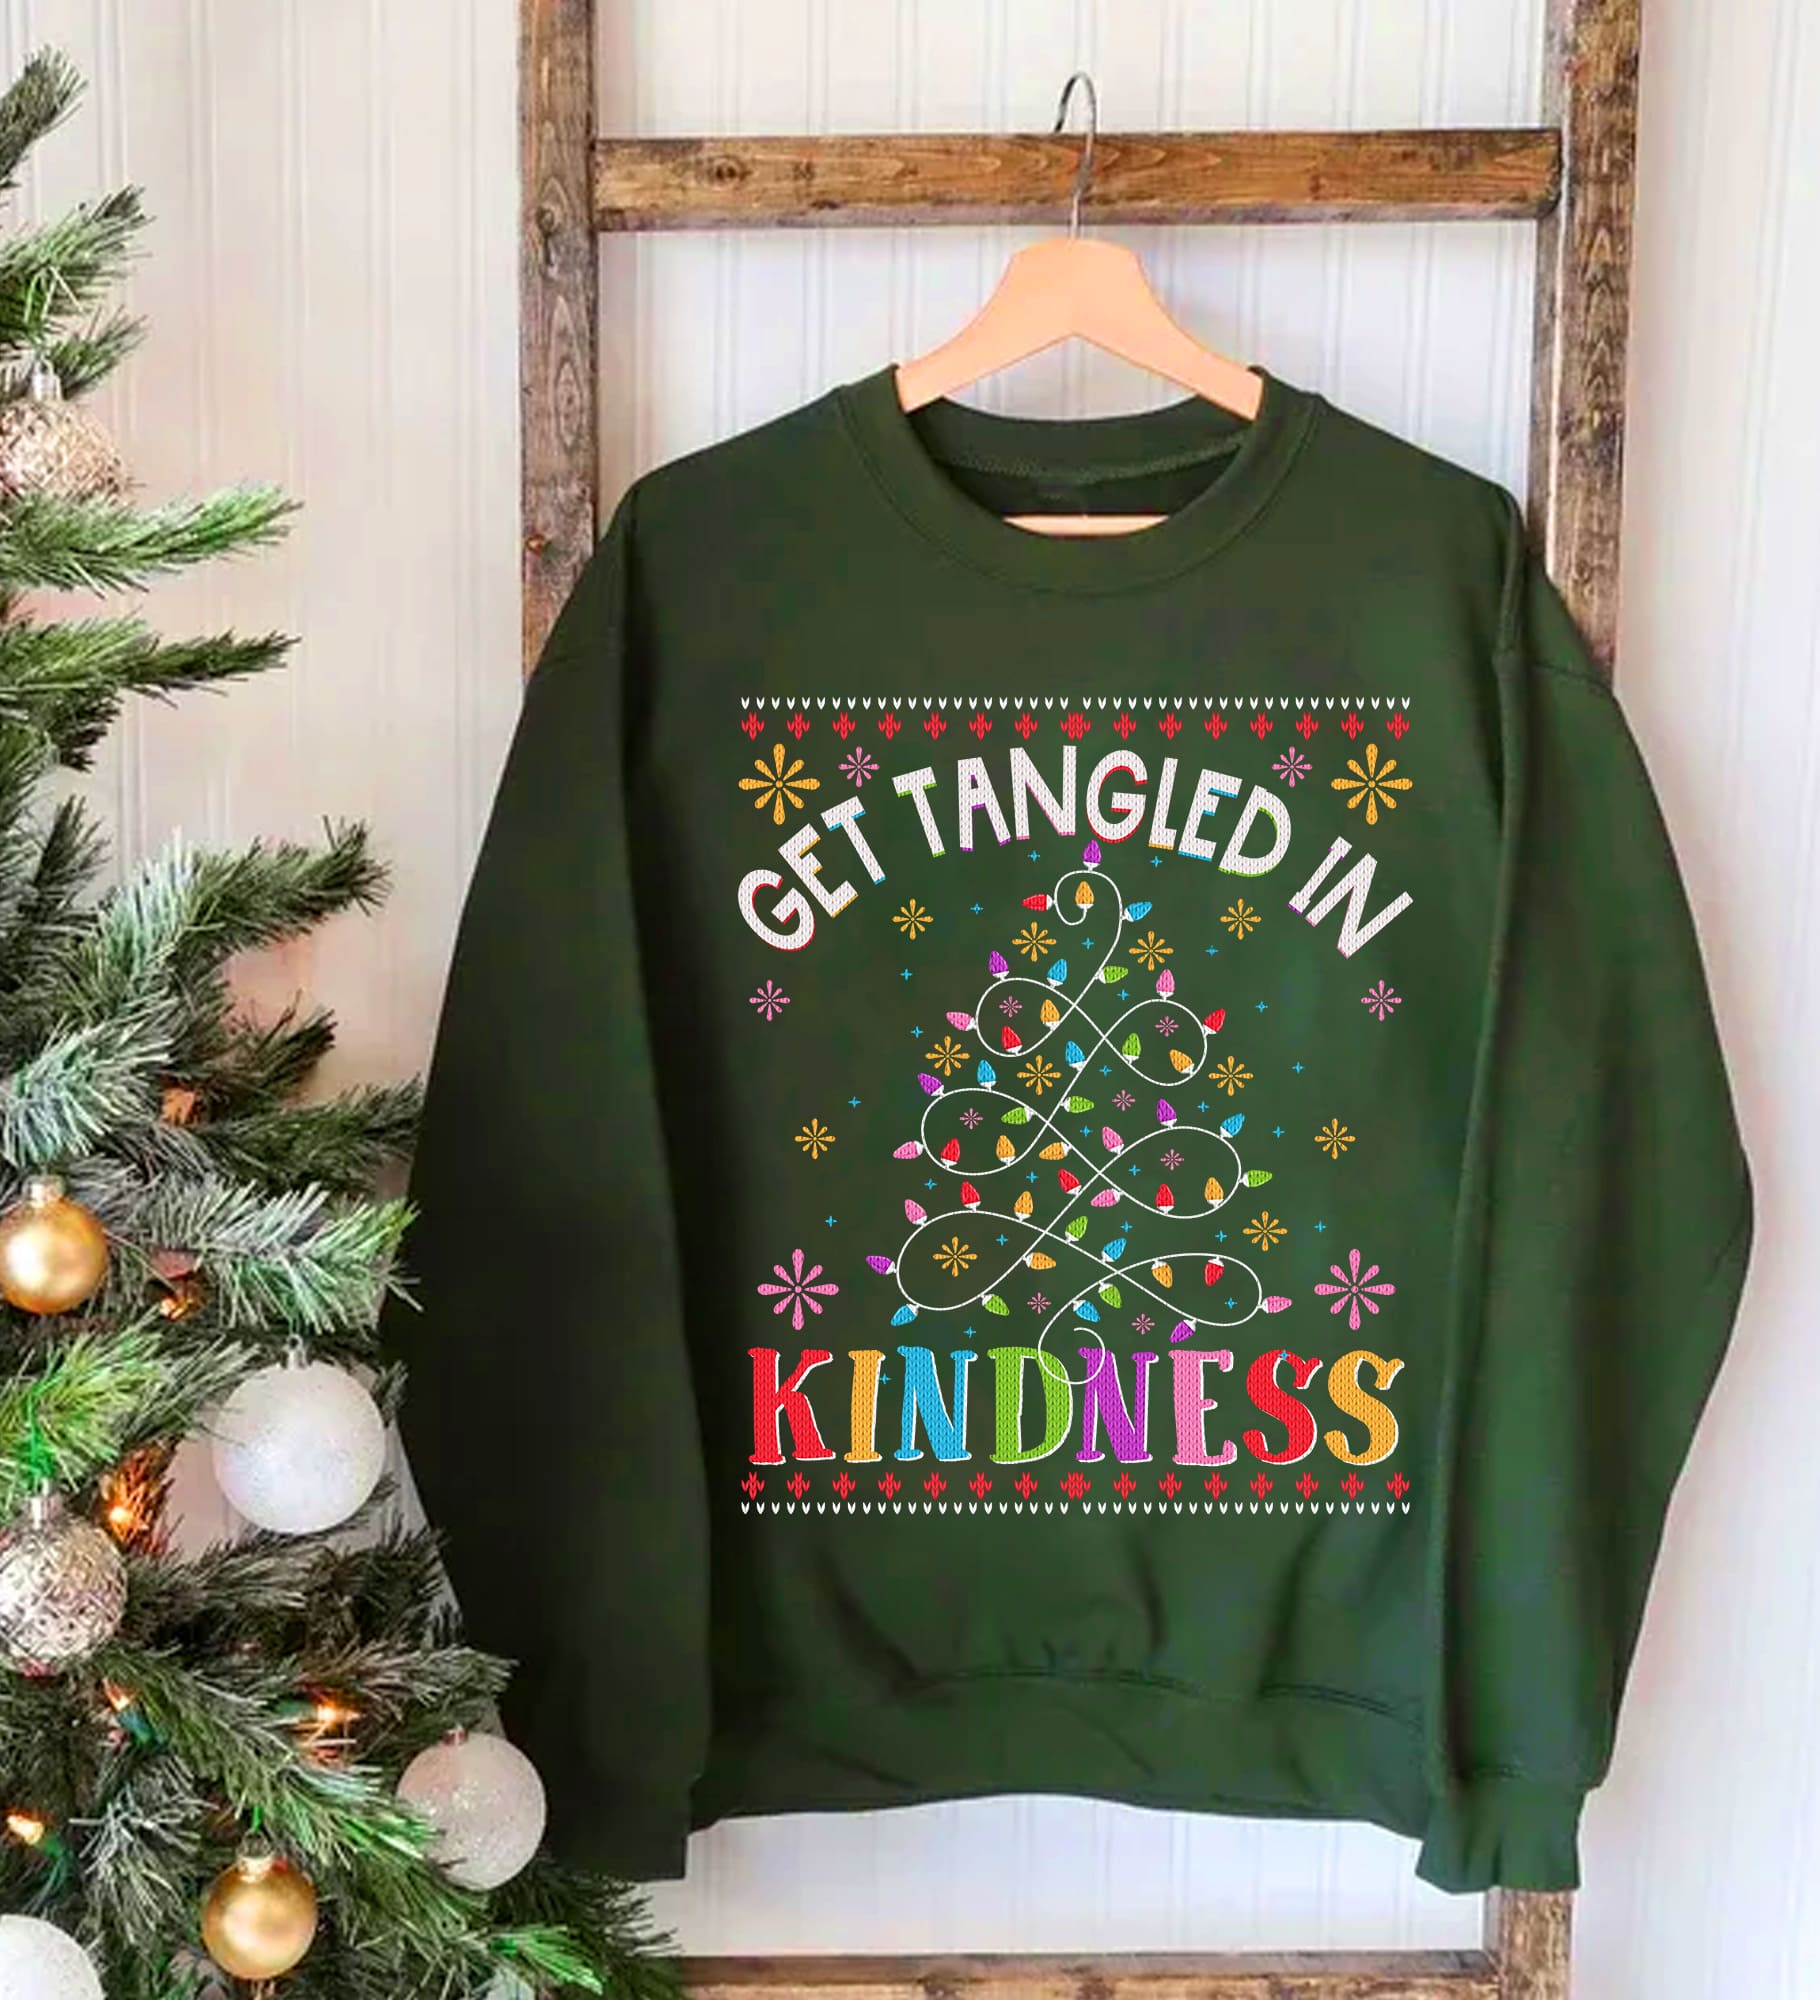 Christmas Lights Tree - Get tangled in kindness